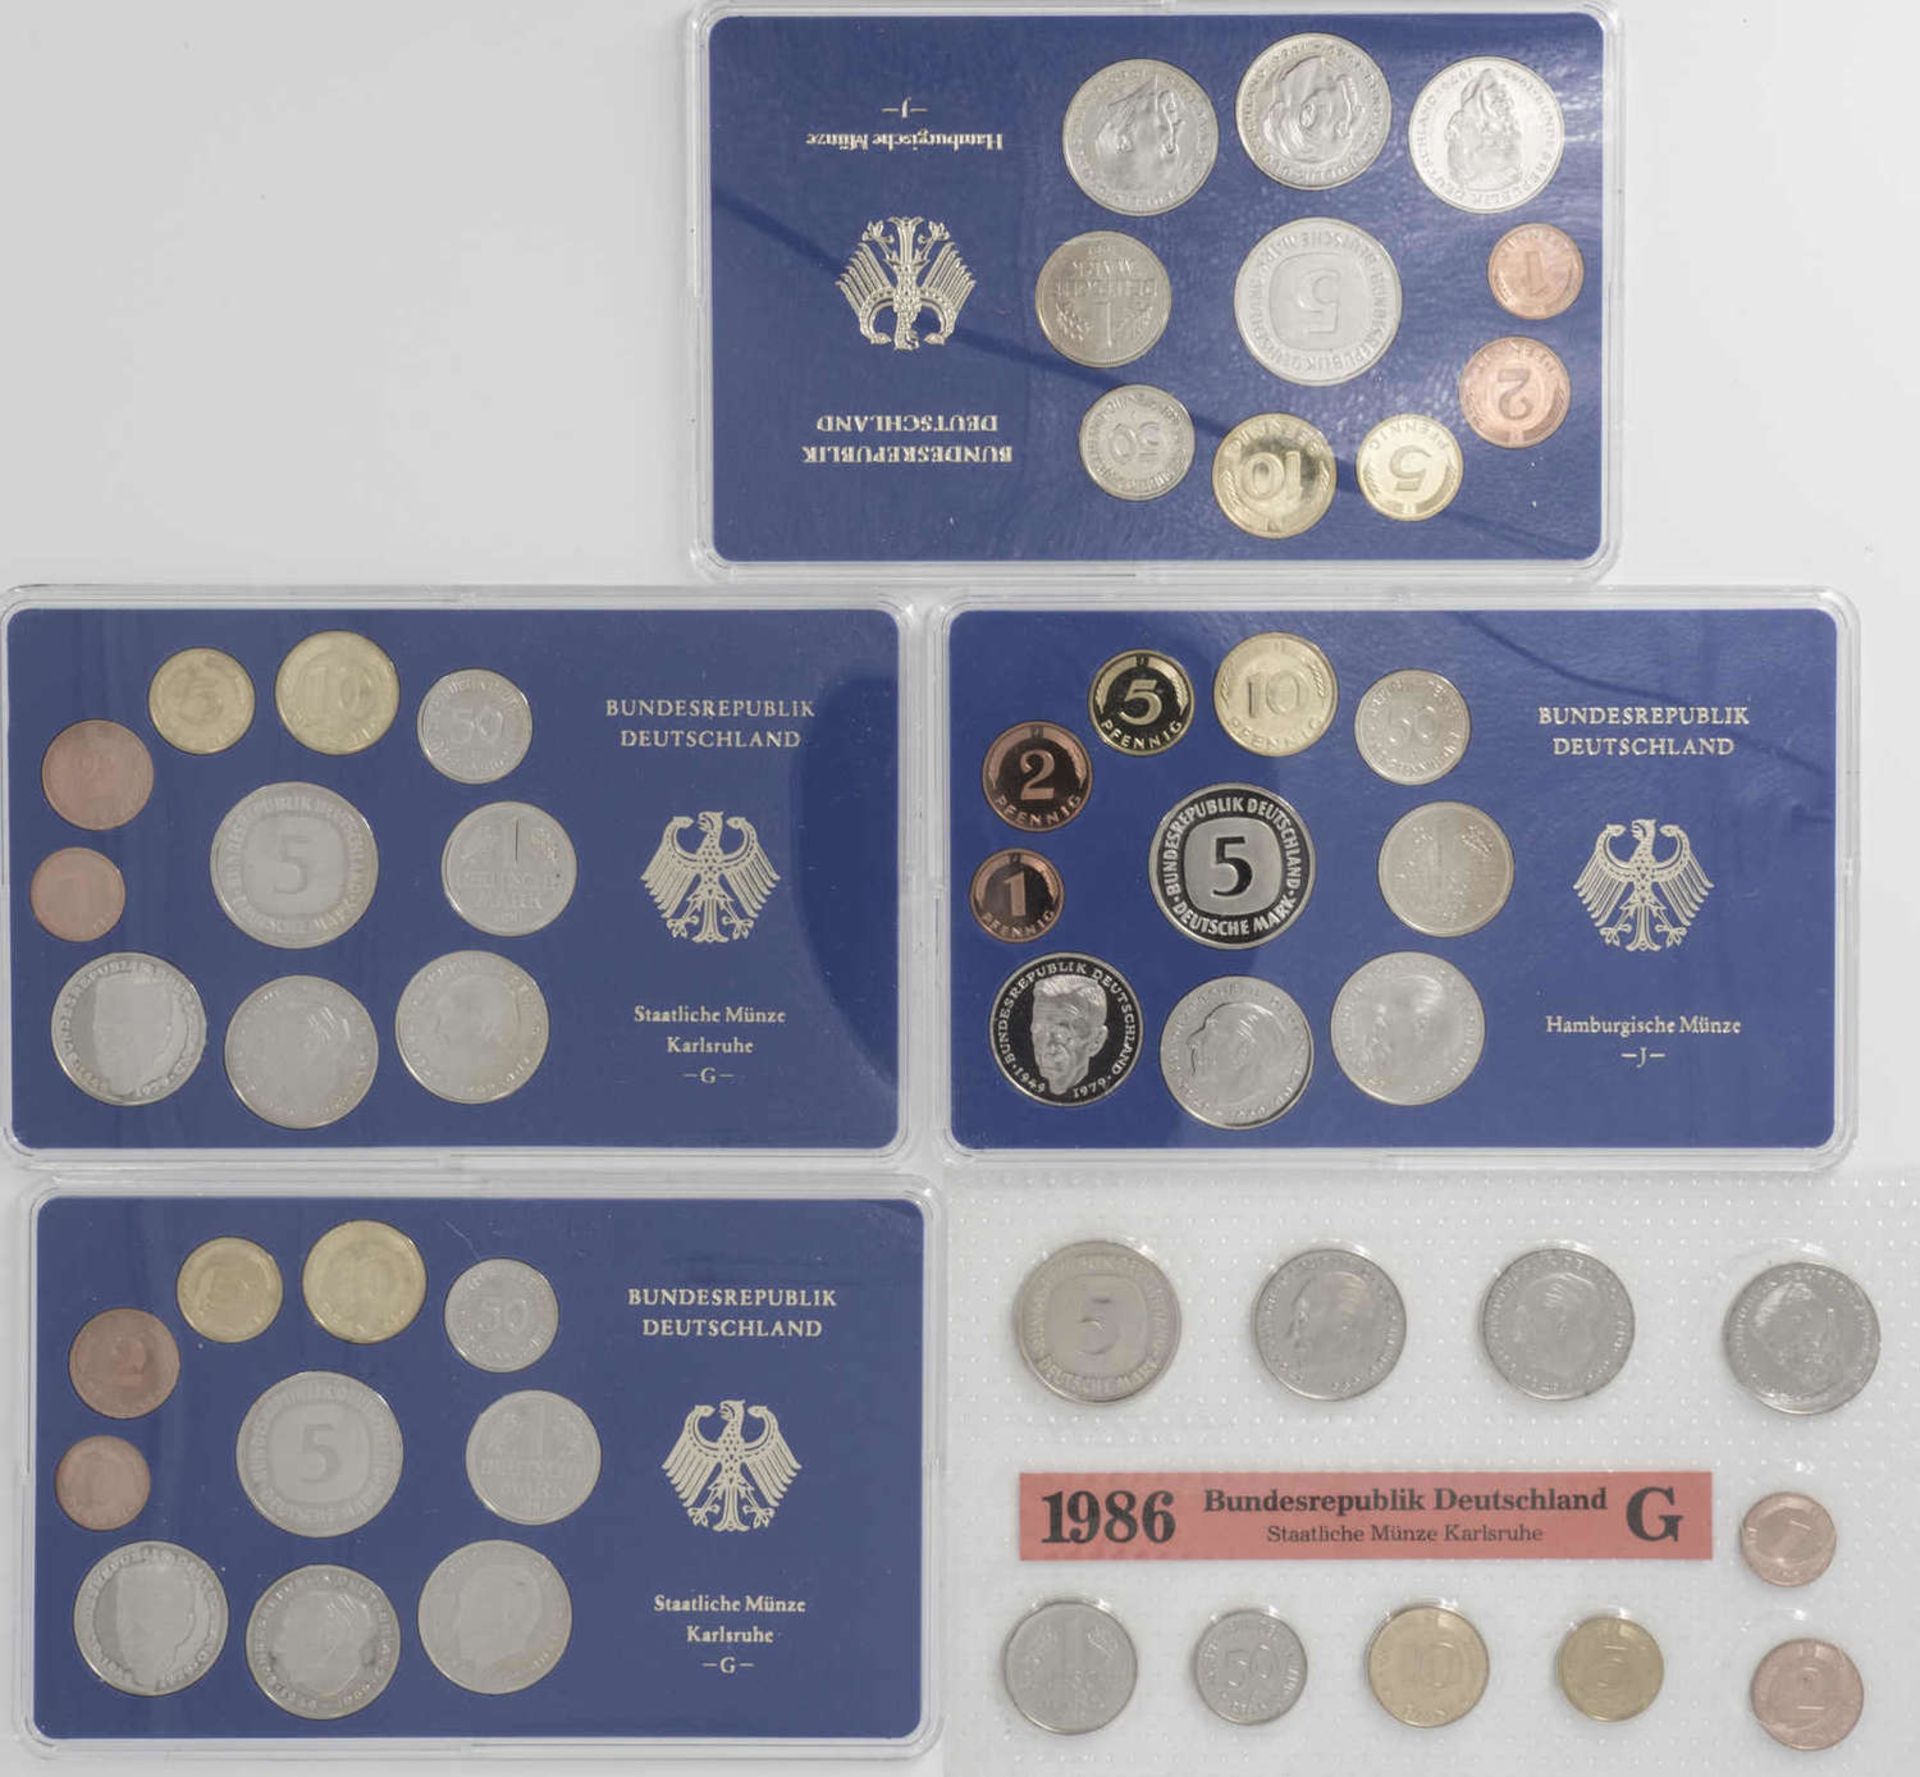 BRD 1981, coin sets 2 x G and 2 x J, Proof. In addition 1986 G course coin set, BU. - Bild 2 aus 2